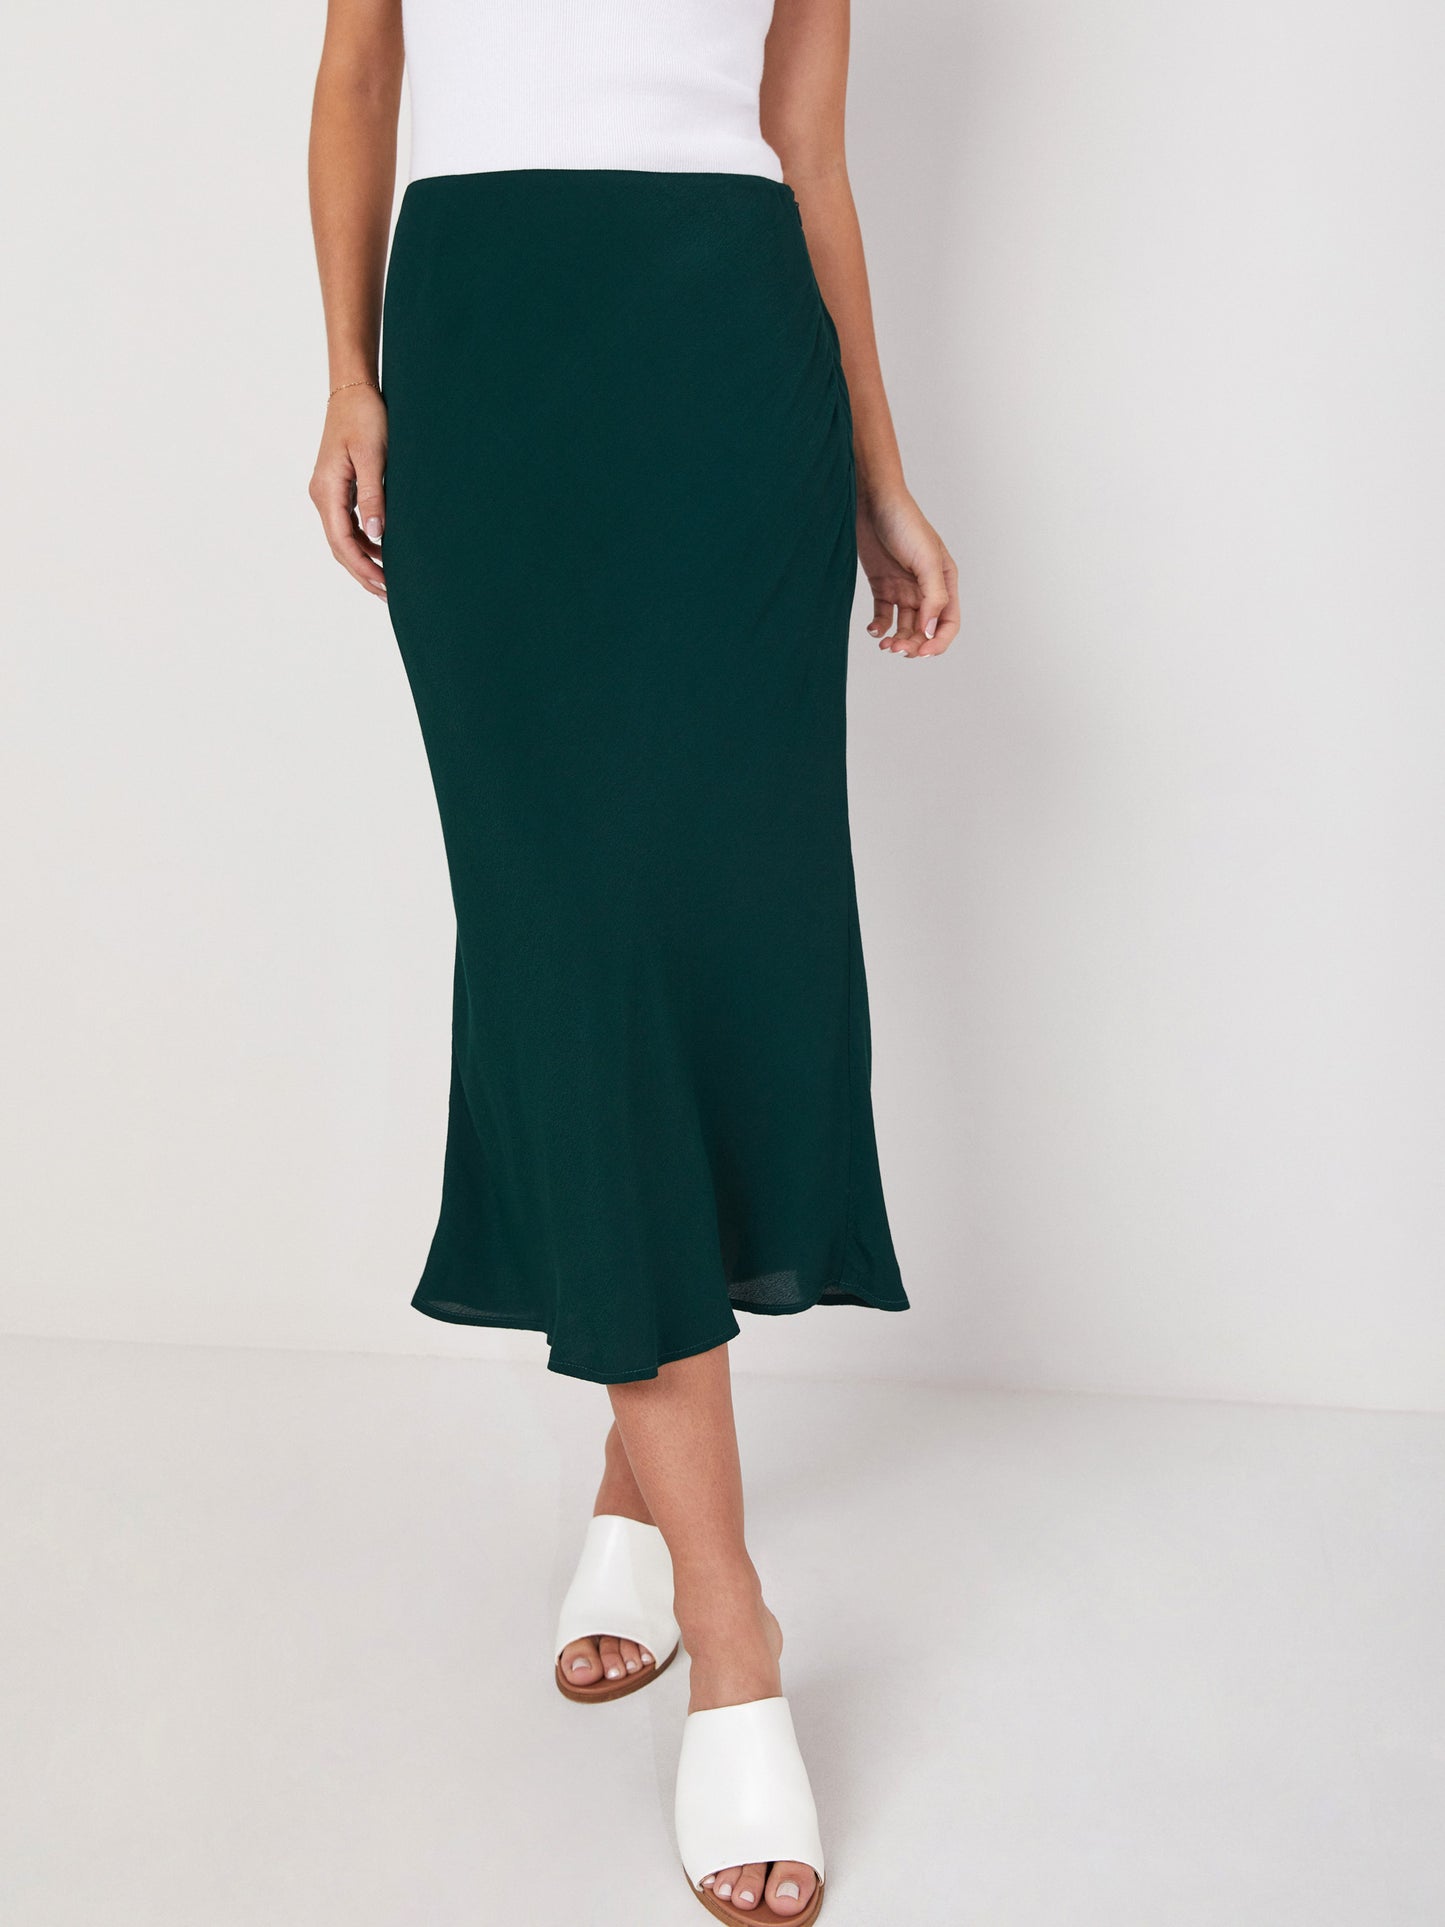 Meredith Lined Skirt